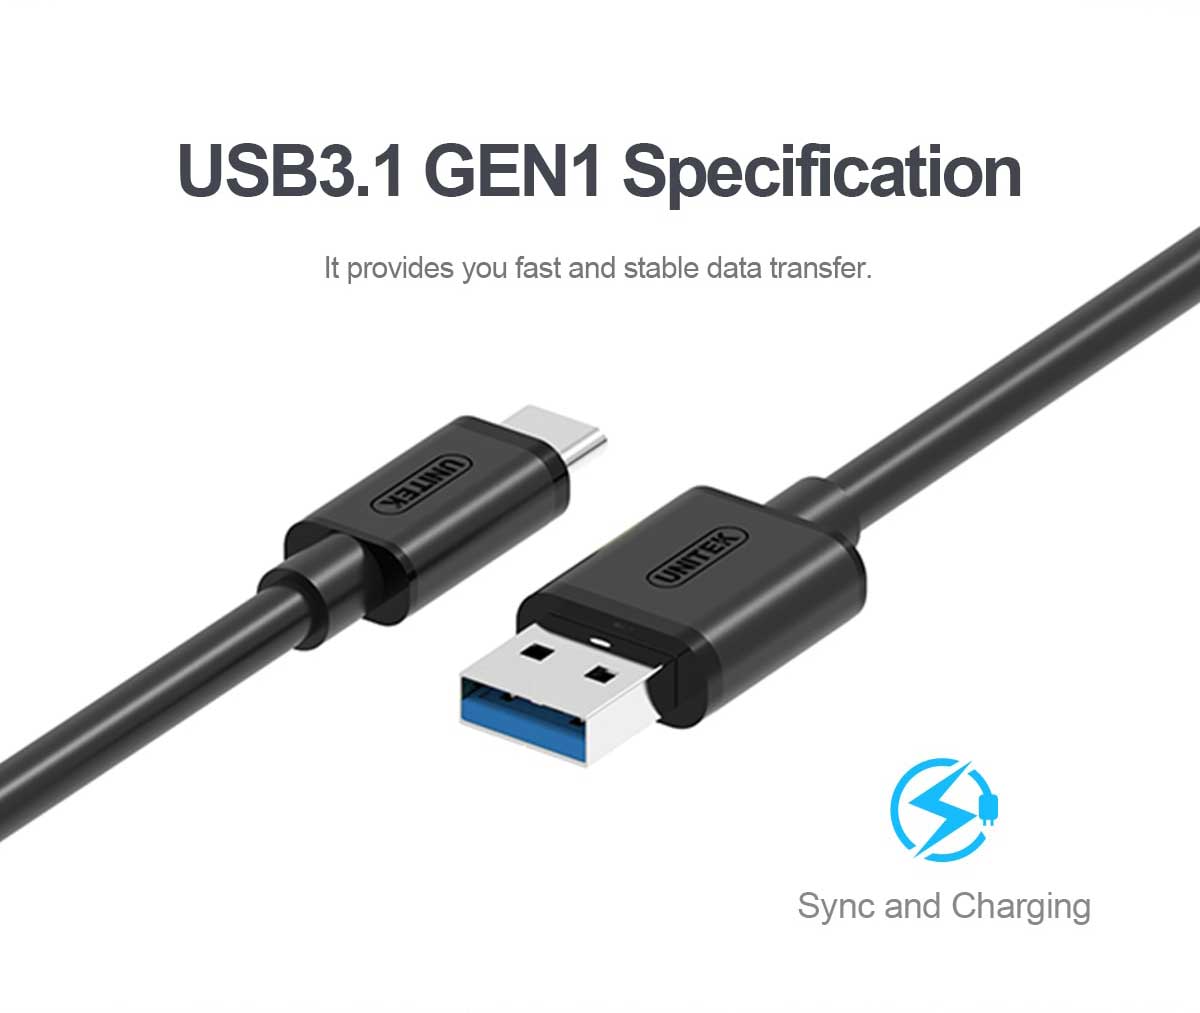 USB 3.1 Gen1 Specification. It provides you fast and stable data transfer. Sync and charging.